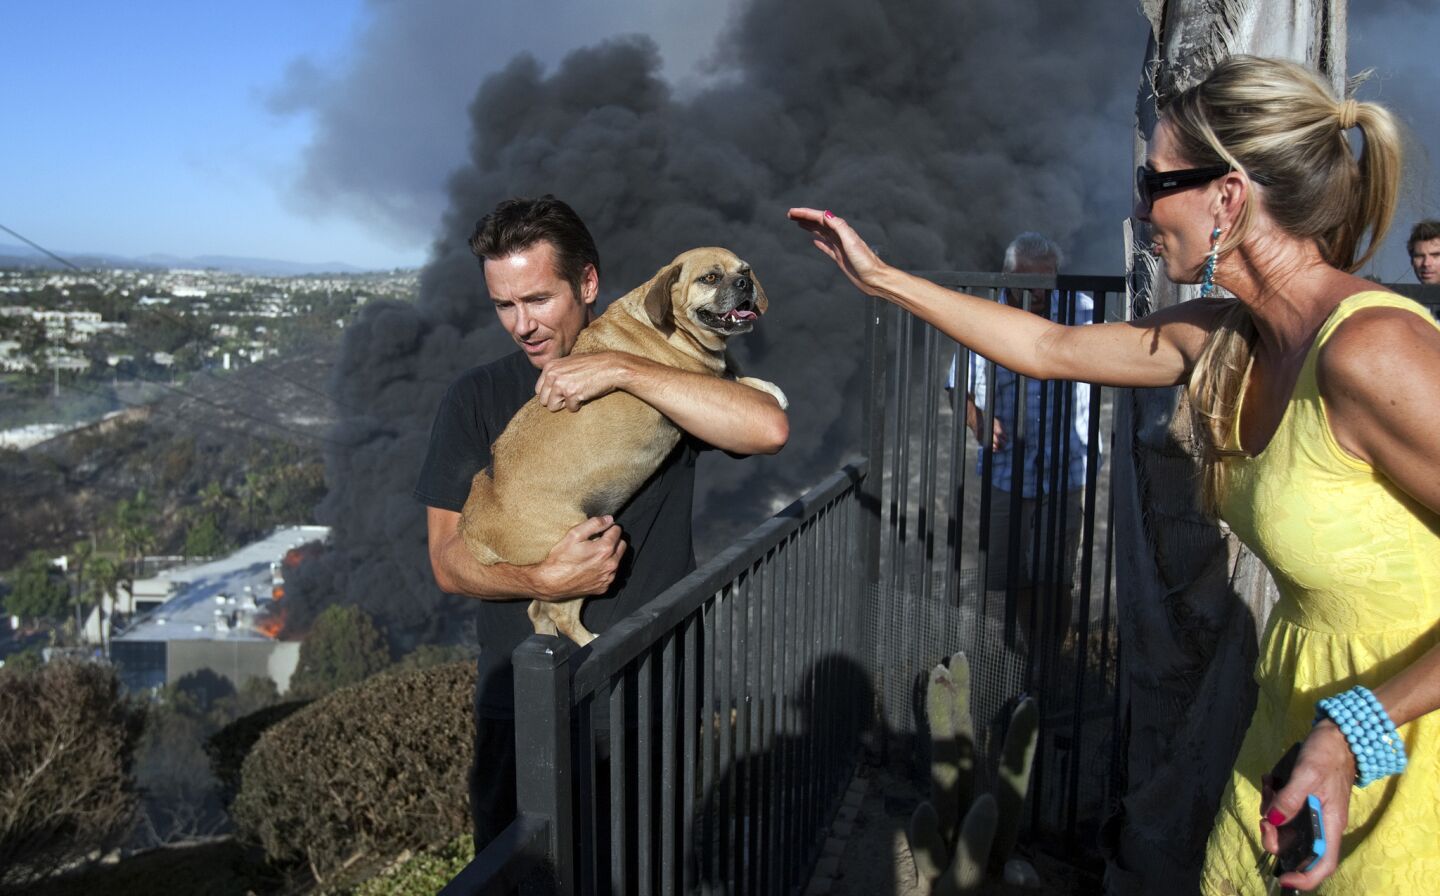 Bronson Payne carries his dog, Rocky, to safety as his sister, Anya Bannasch, watches. Rocky was found hiding in the back of his burned home on Black Rail Road after it was destroyed in the Poinsettia wildfire on Wednesday in Carlsbad. An industrial blaze sparked by the wildfire burns in the background.